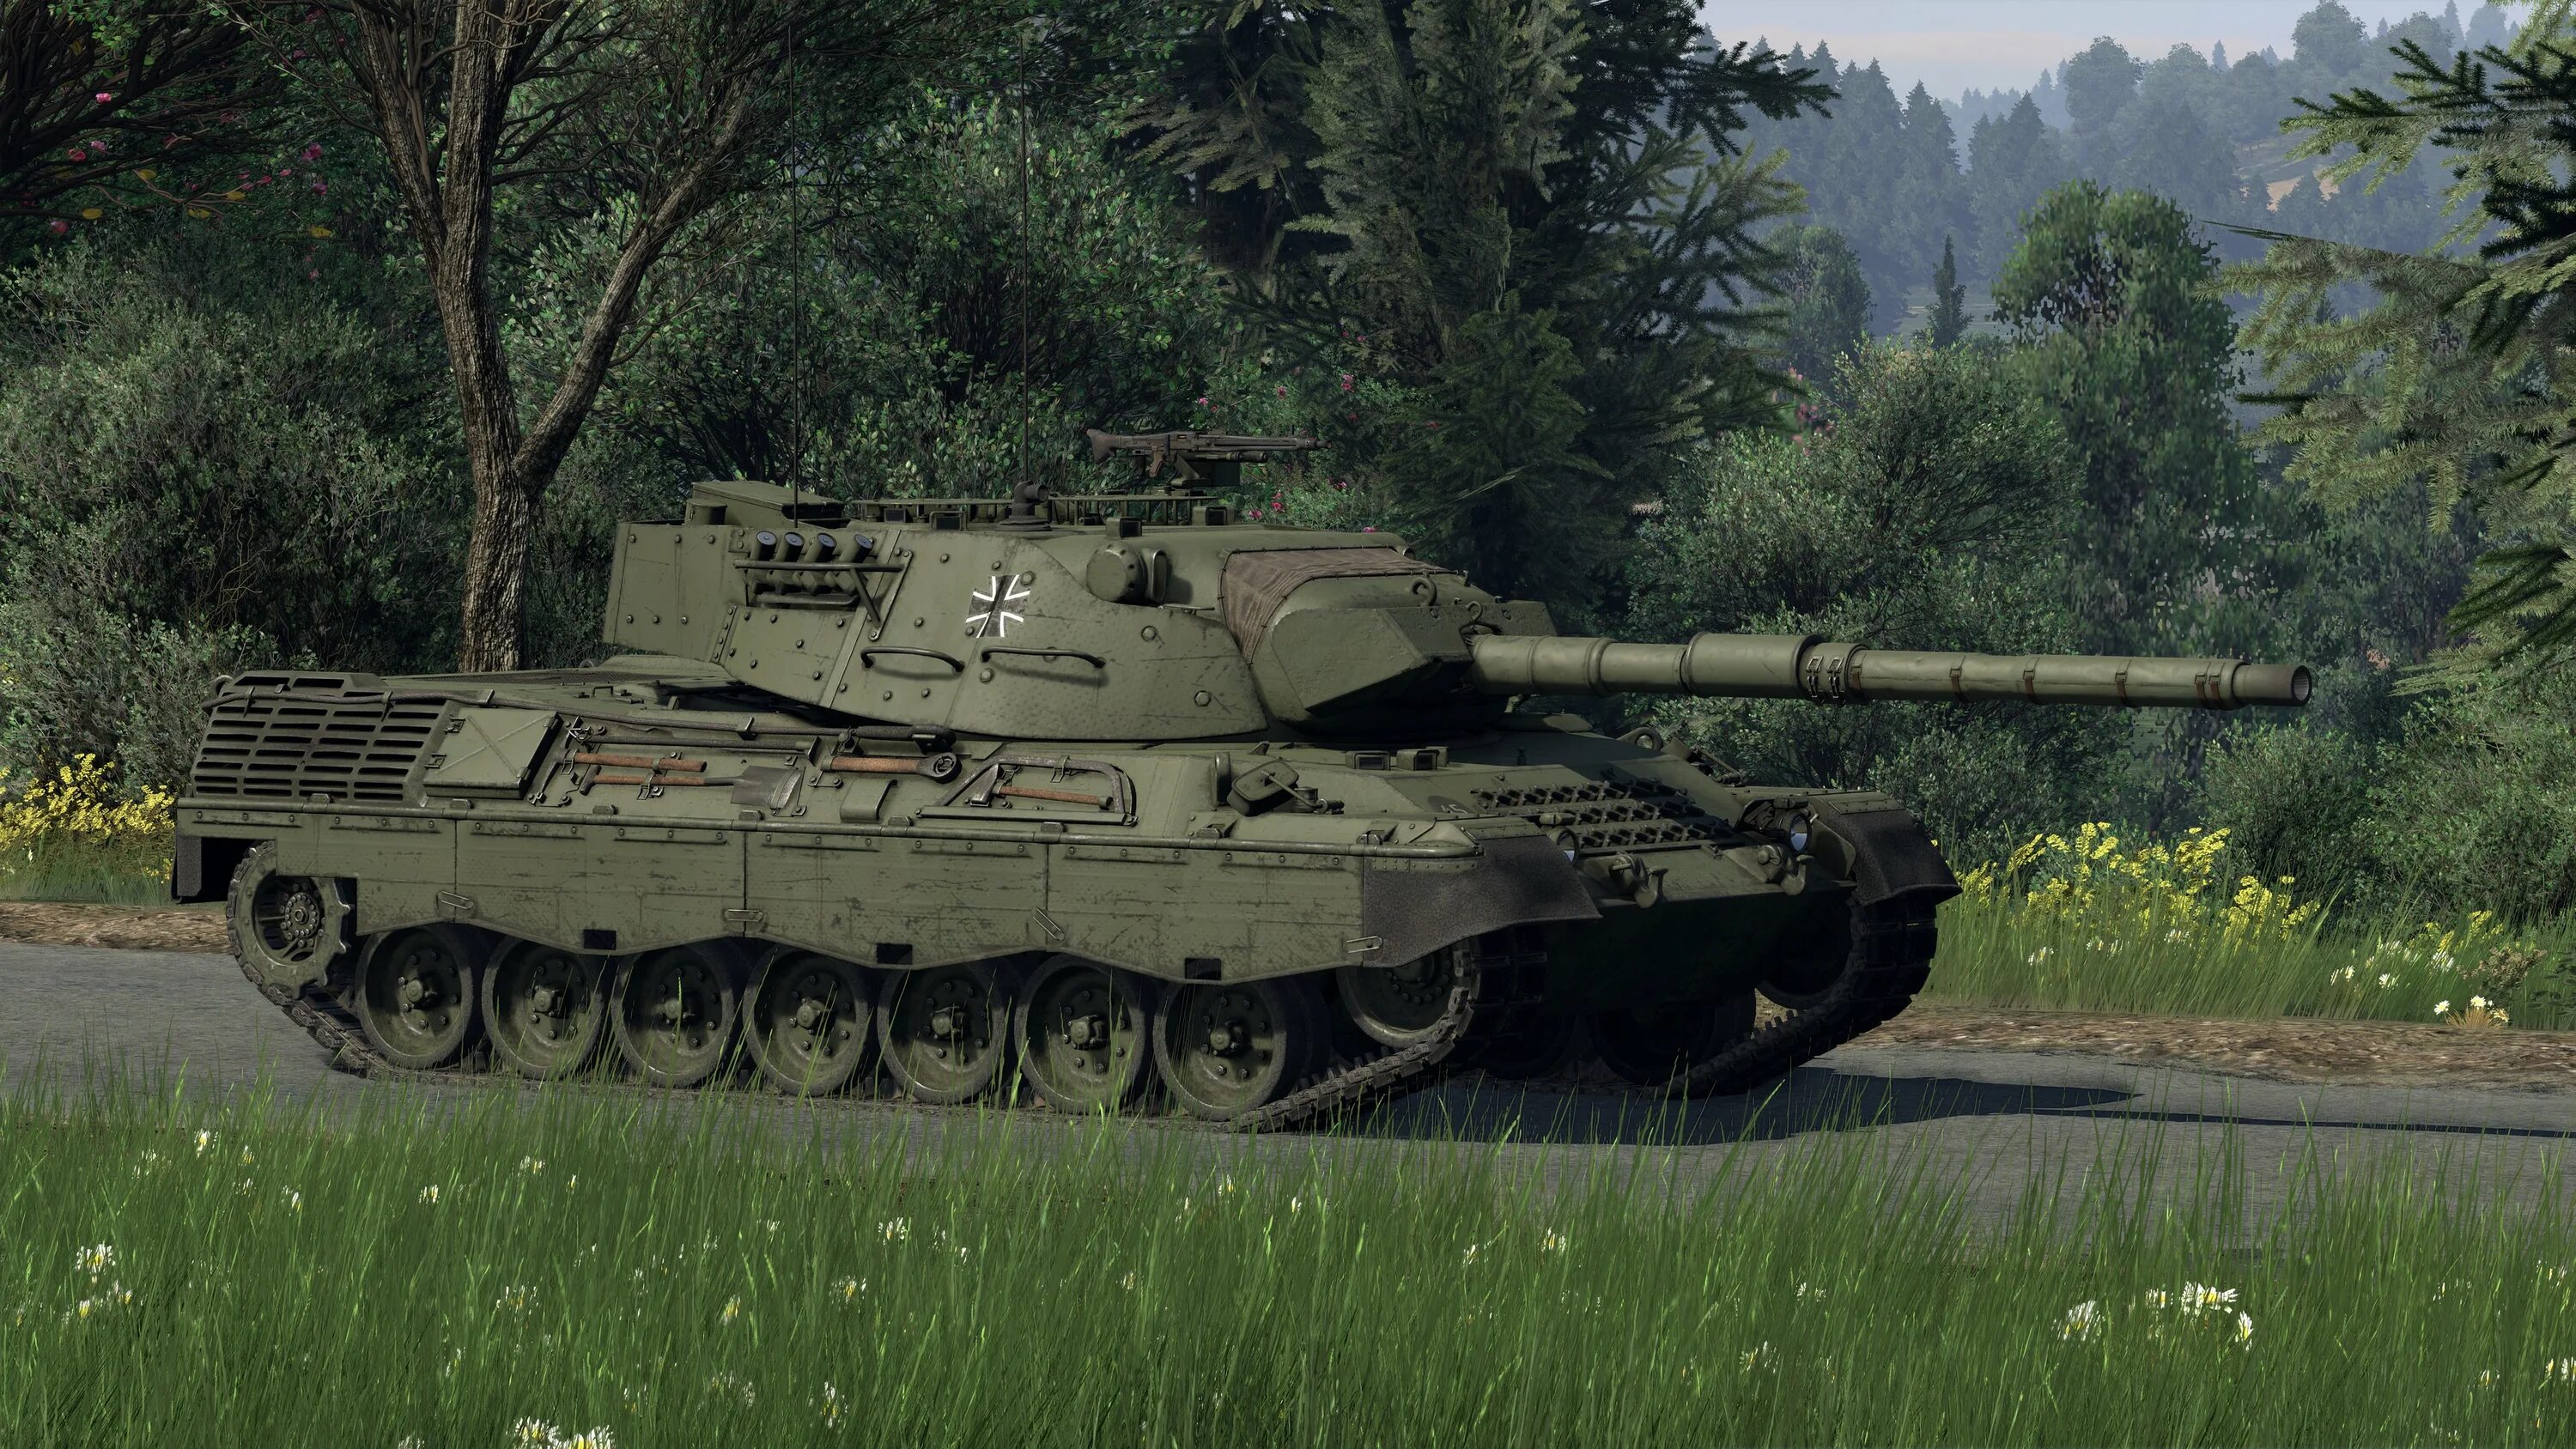 Leopard 1a5. Танк леопард 1а5. Танк леопард 1. Леопард 1 вар Тандер.